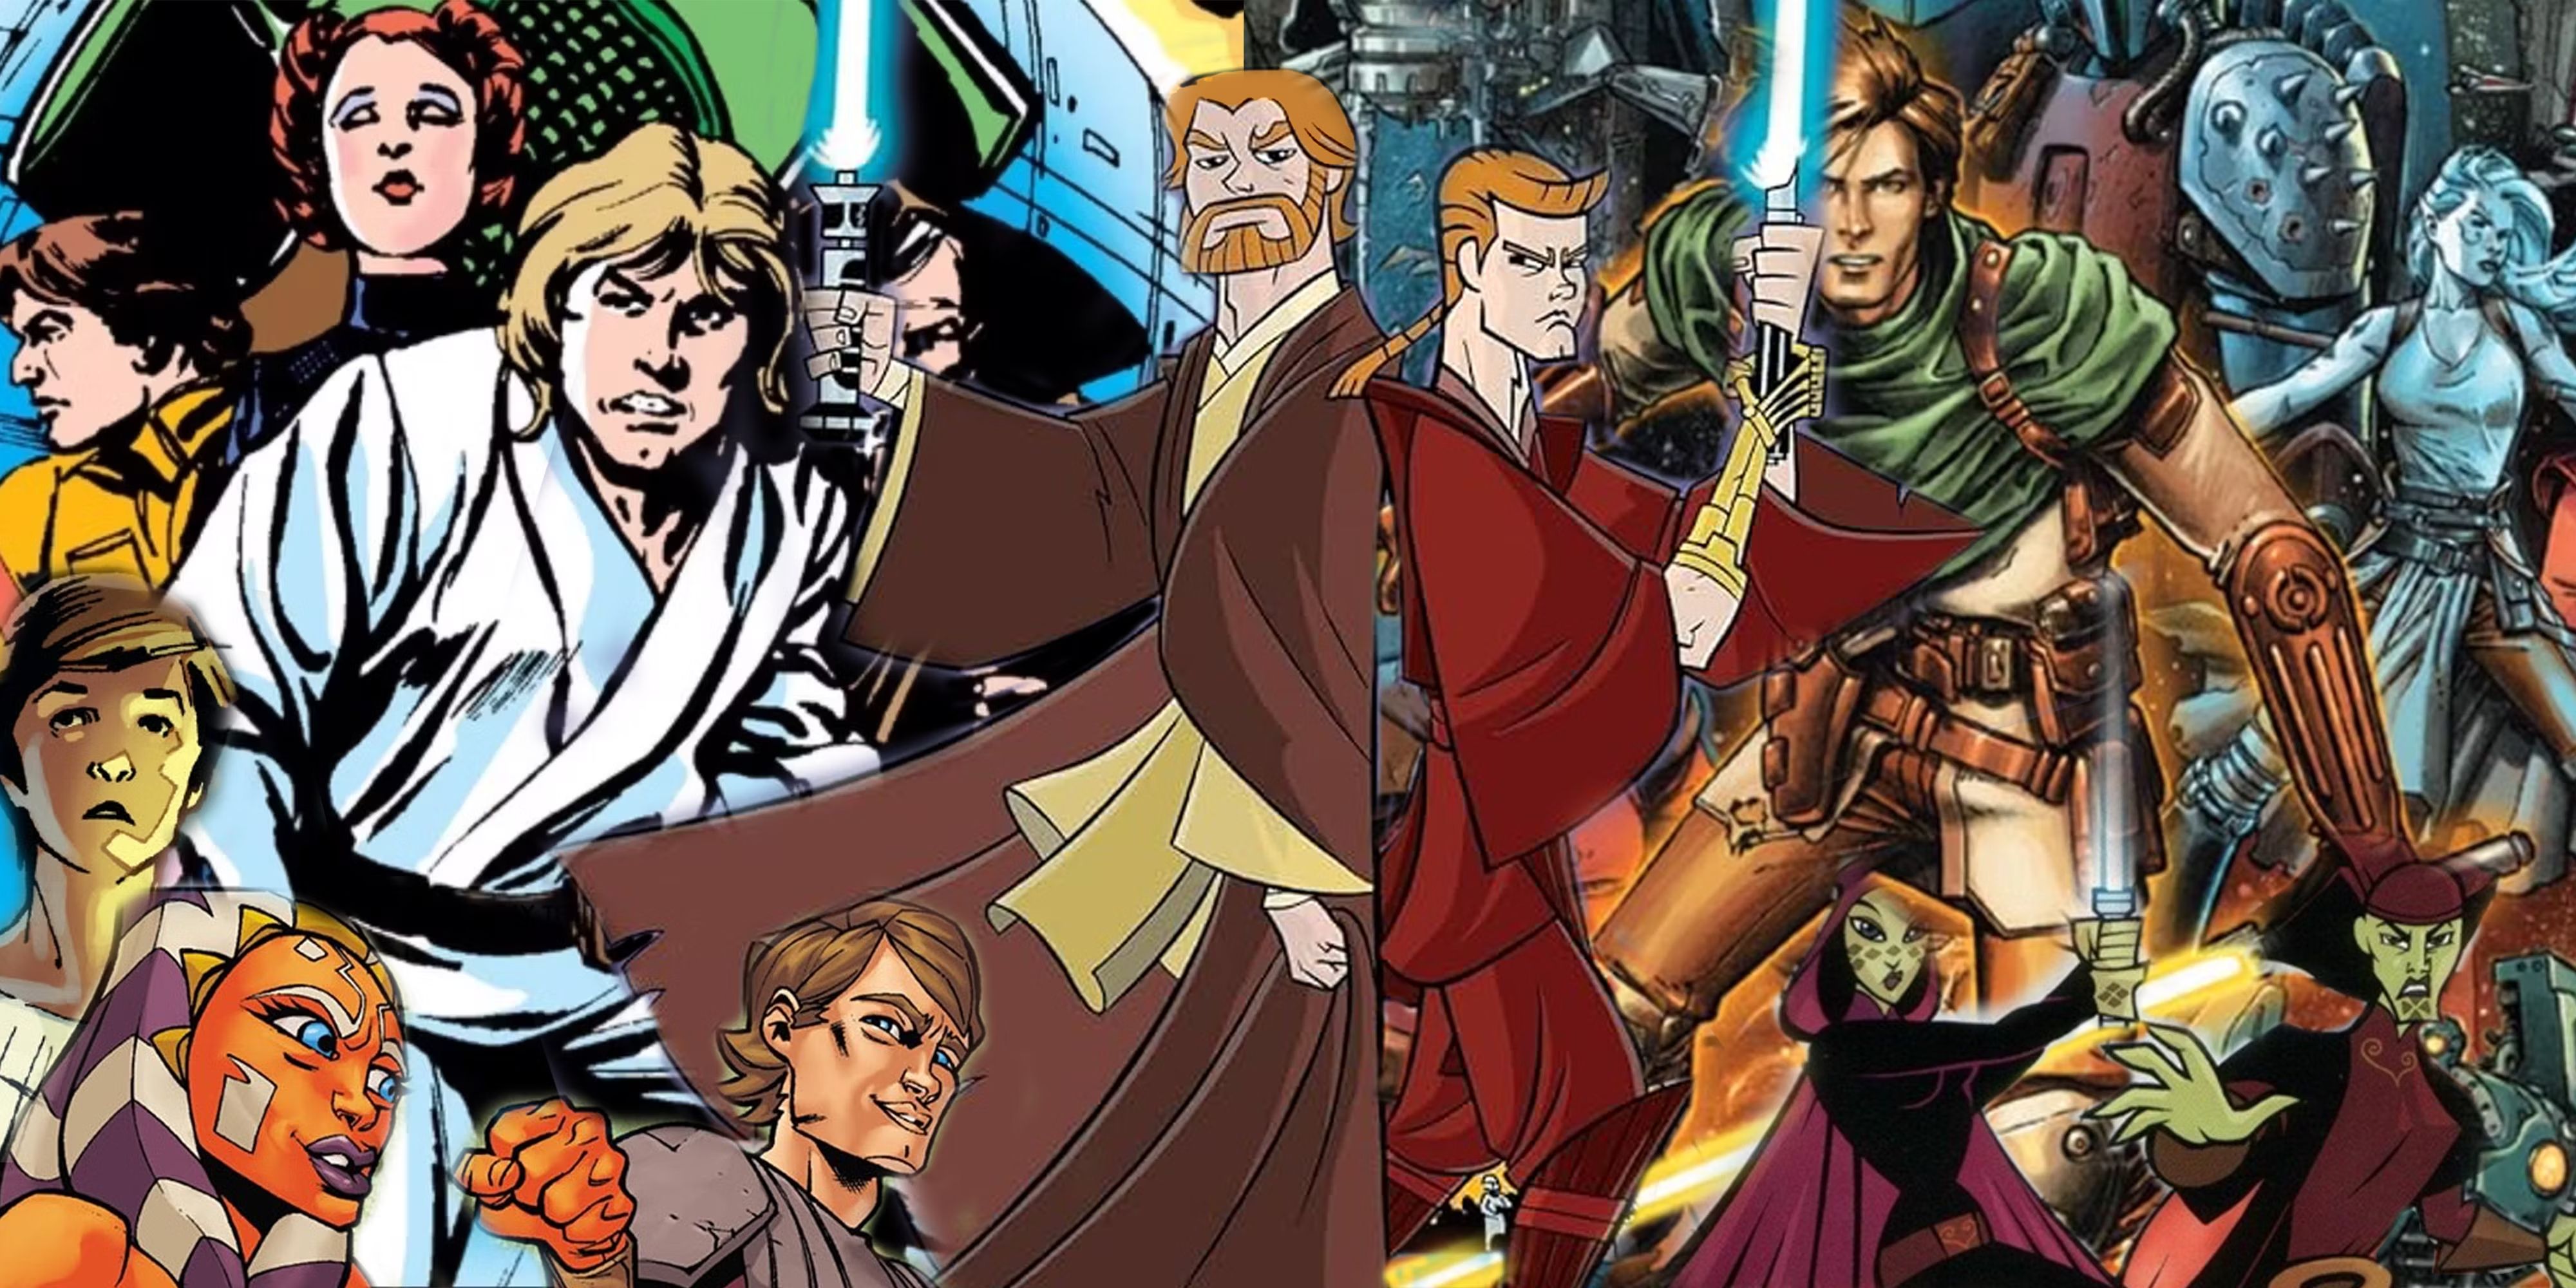 A collage of different Star Wars characters from the comics